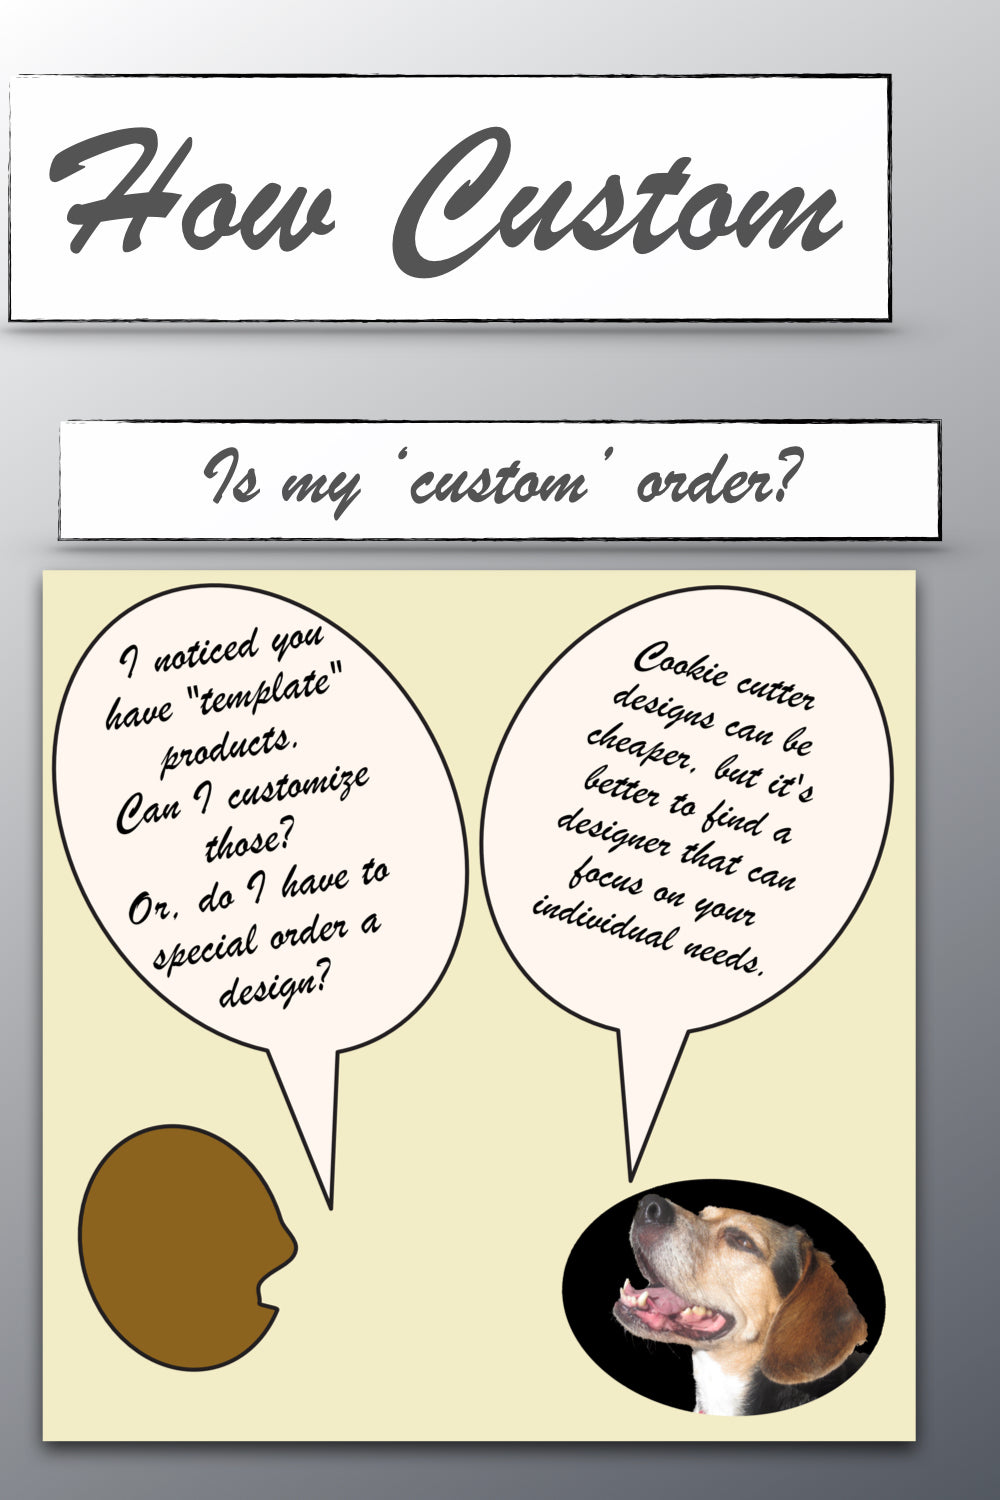 Slide saying "How custom is my 'custom' order?" Image of a face drawing and speech bubble, "noticed you have 'template' products. Can I customize those? Or, need special order?" Beagle replies "cookie cutter designs can be cheaper, but better to find designer focus on individual needs"